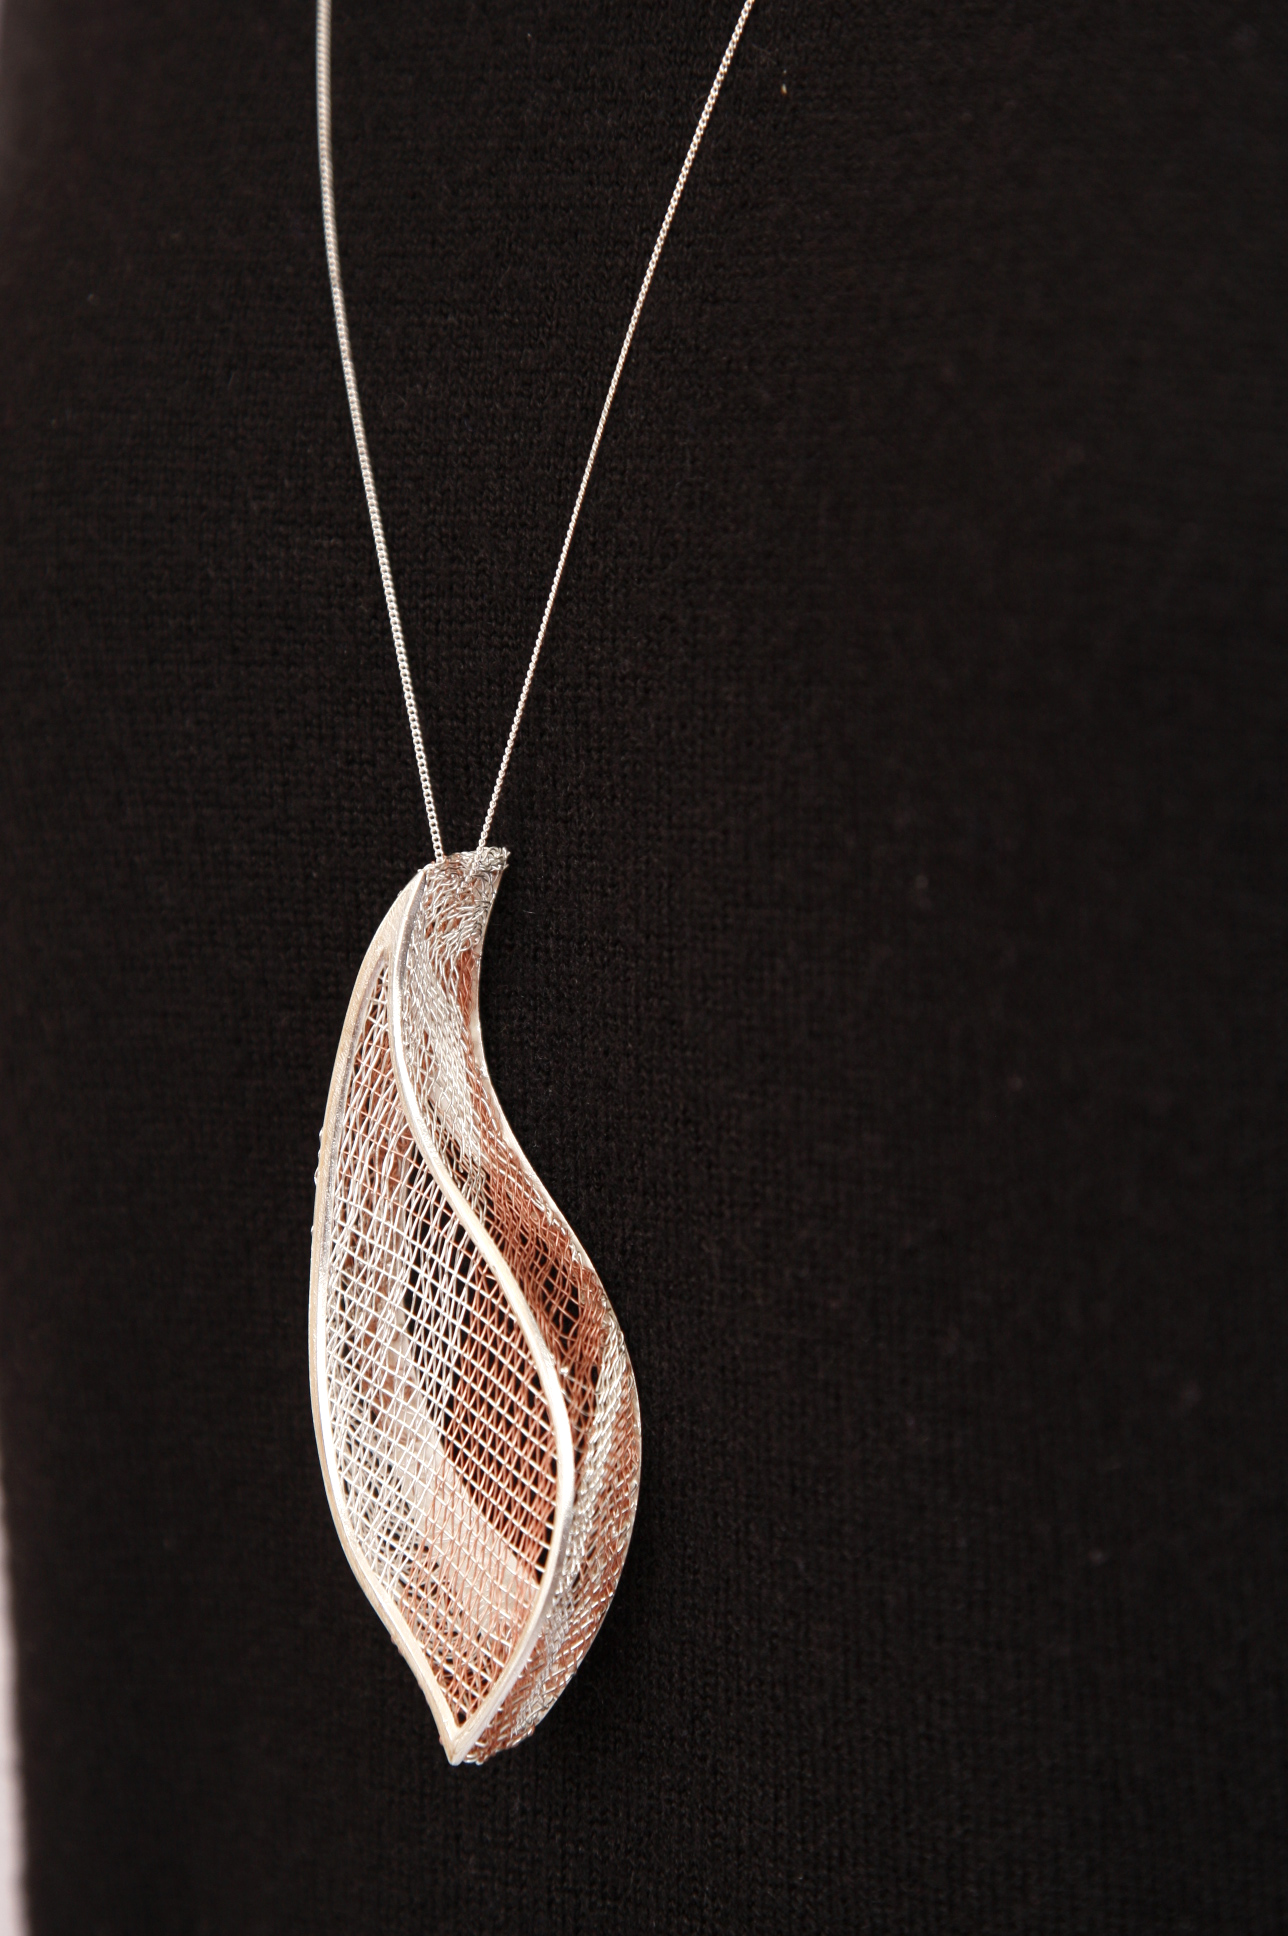  Handwoven copper and fine silver necklace. 